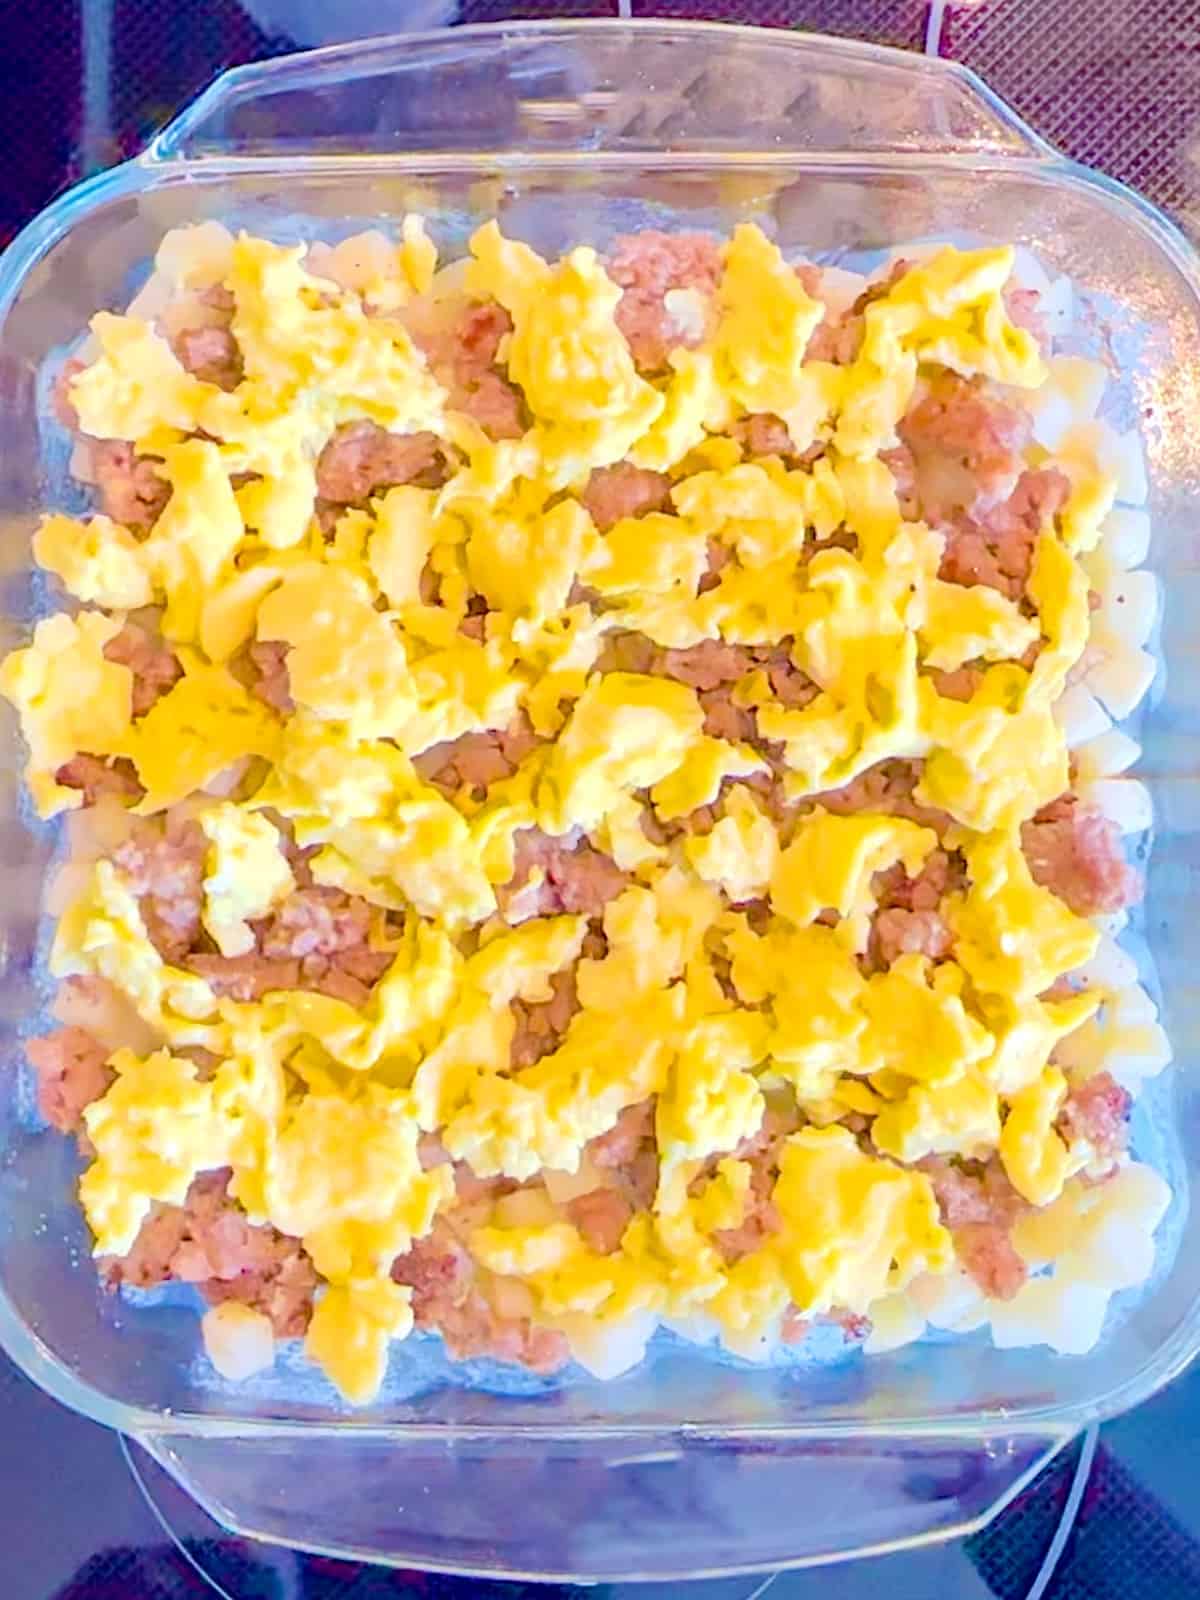 Potatoes, breakfast, sausage, and eggs in a glass dish.